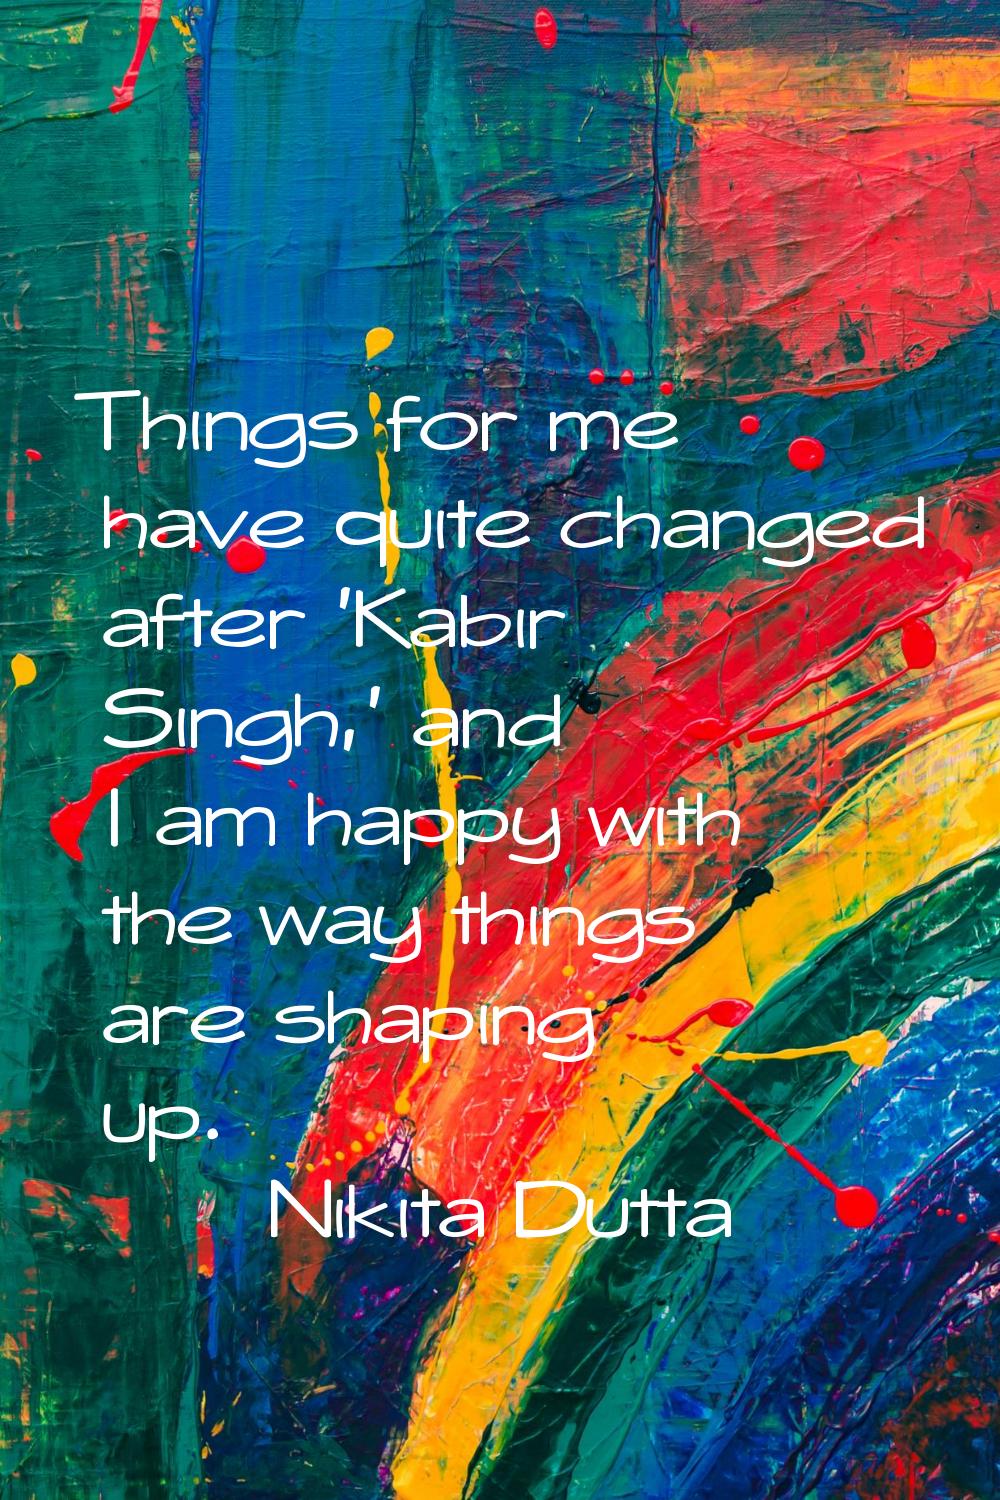 Things for me have quite changed after 'Kabir Singh,' and I am happy with the way things are shapin